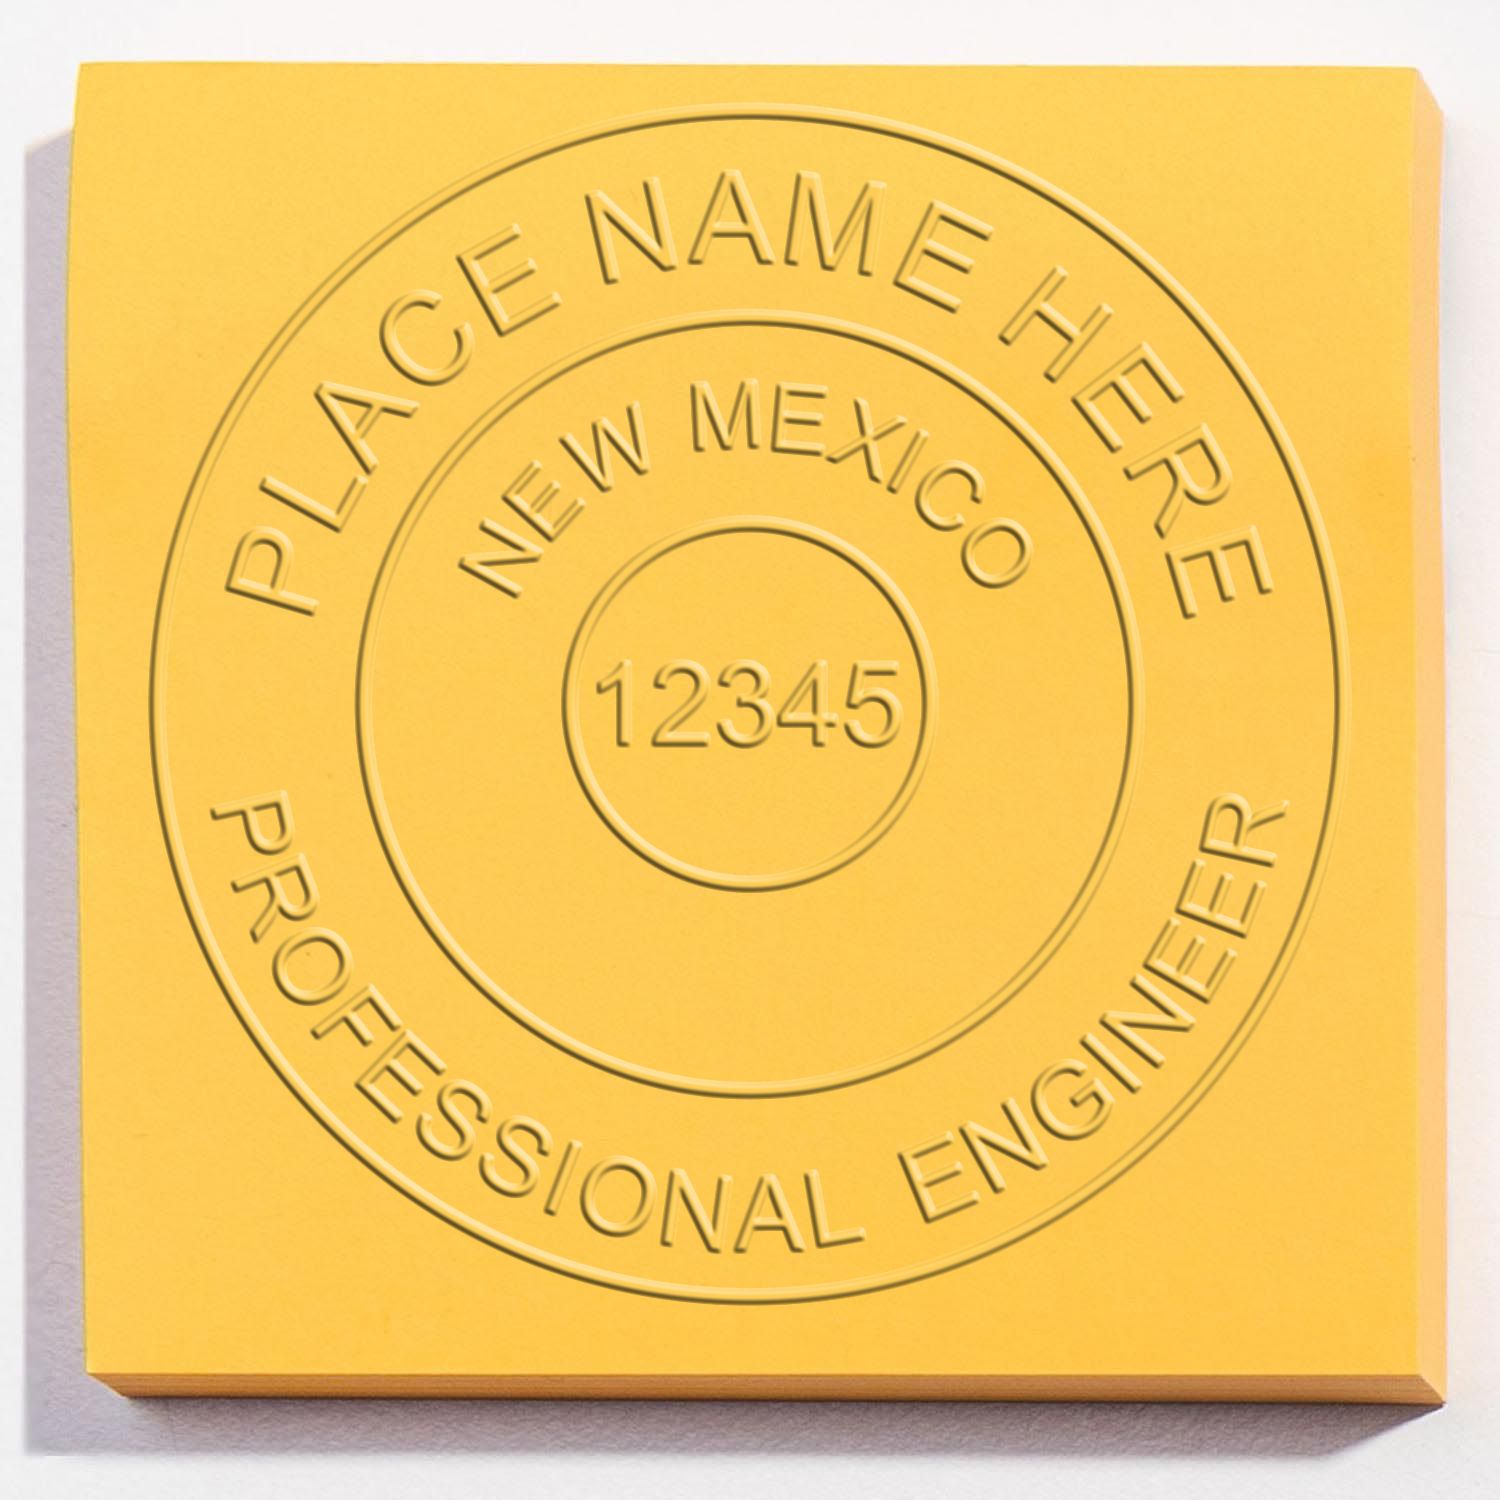 An in use photo of the Hybrid New Mexico Engineer Seal showing a sample imprint on a cardstock